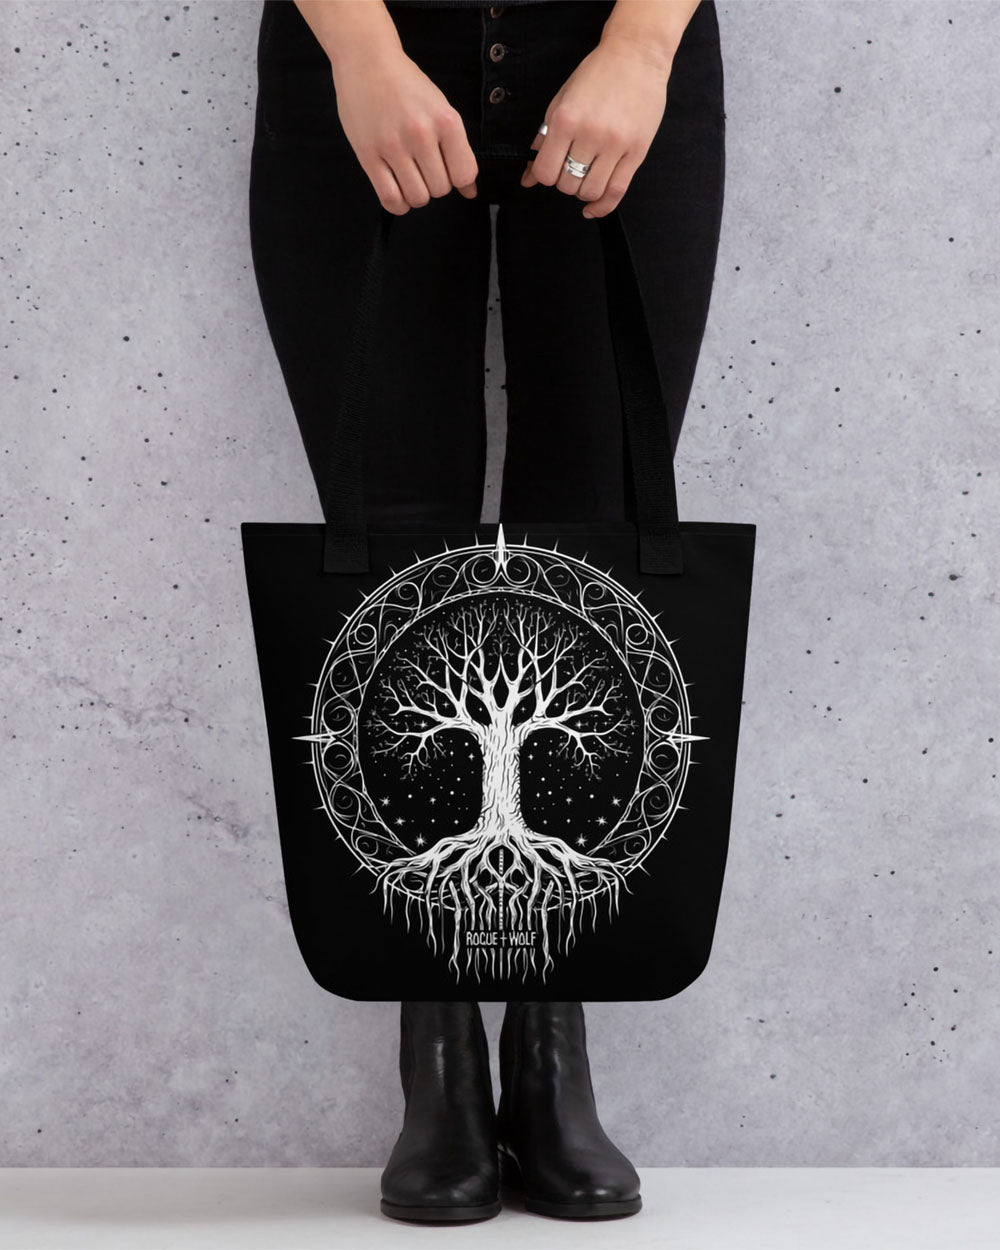 100% Canvas Tote Bag Gothic Witchy Skulls & Witchcraft 